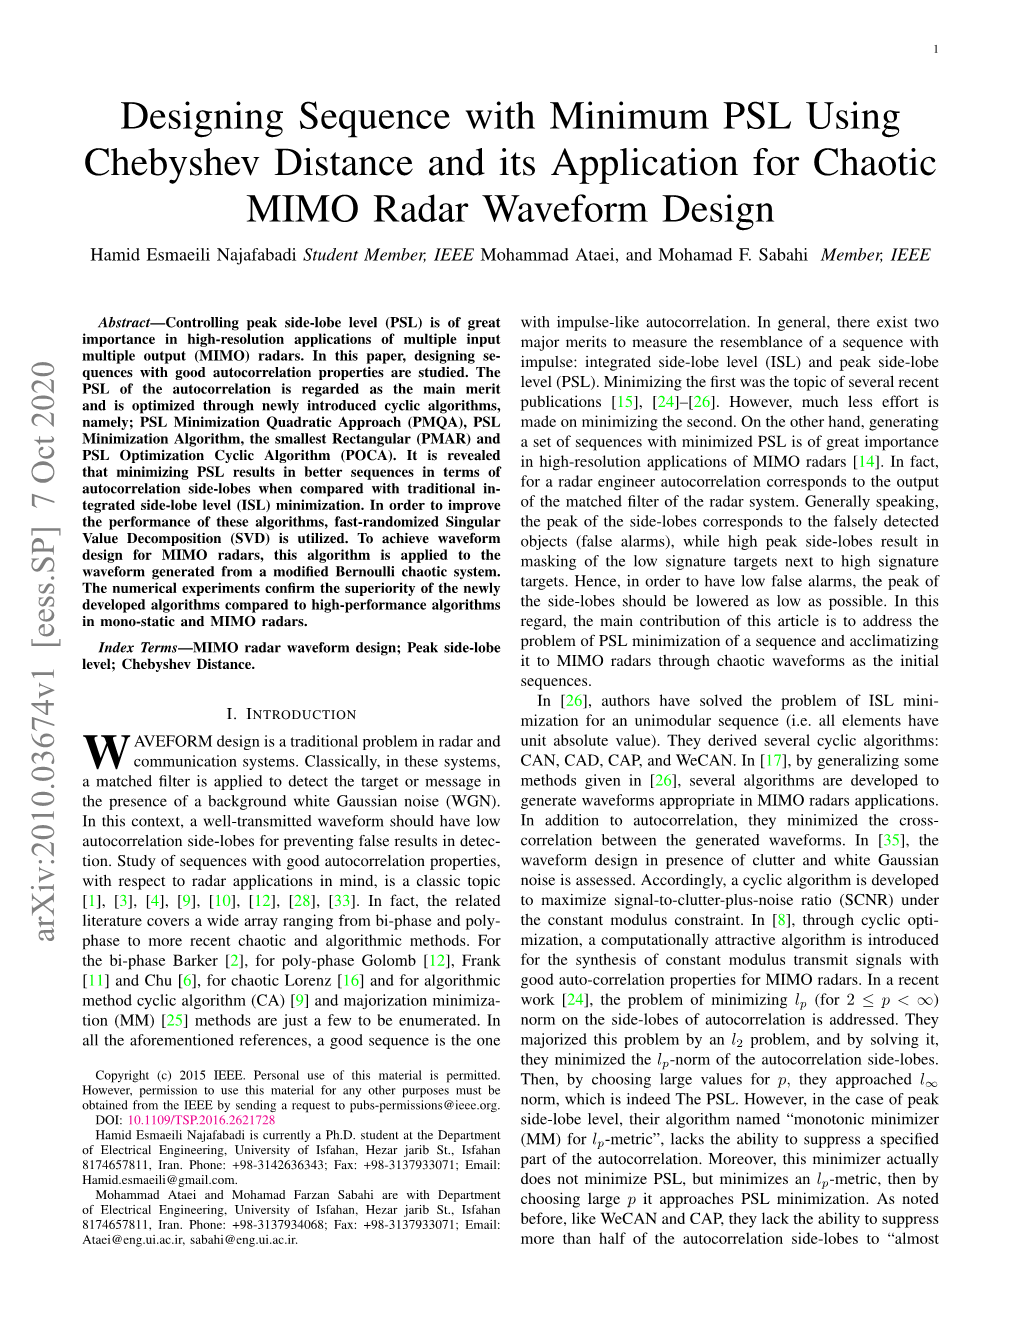 Designing Sequence with Minimum PSL Using Chebyshev Distance and Its Application for Chaotic MIMO Radar Waveform Design